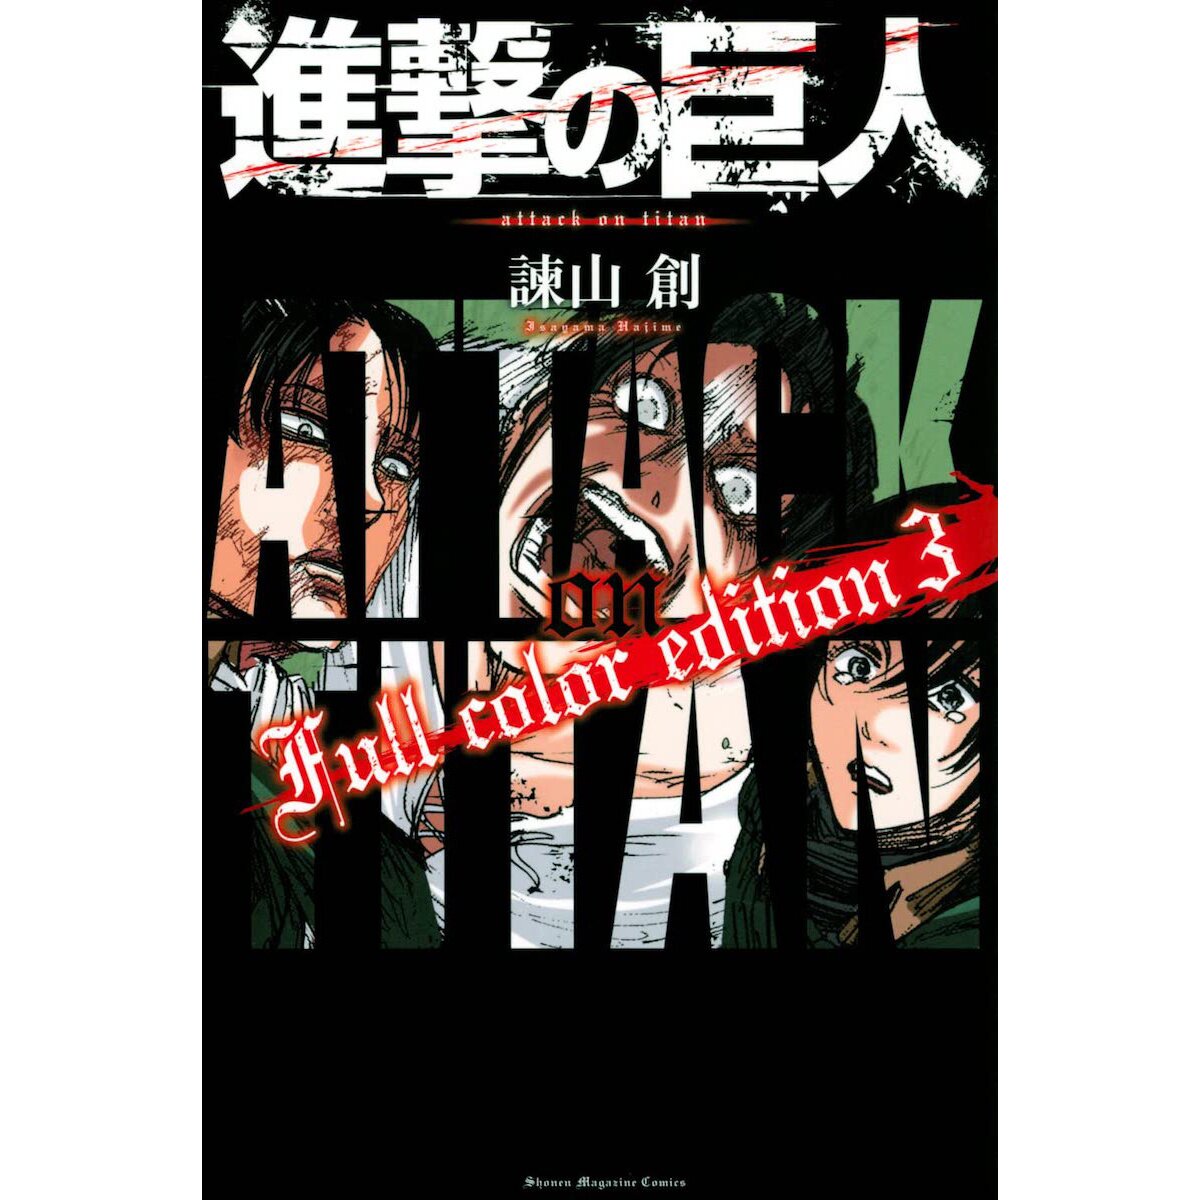 Attack On Titan: Complete Season 3 (Blu-ray) for sale online